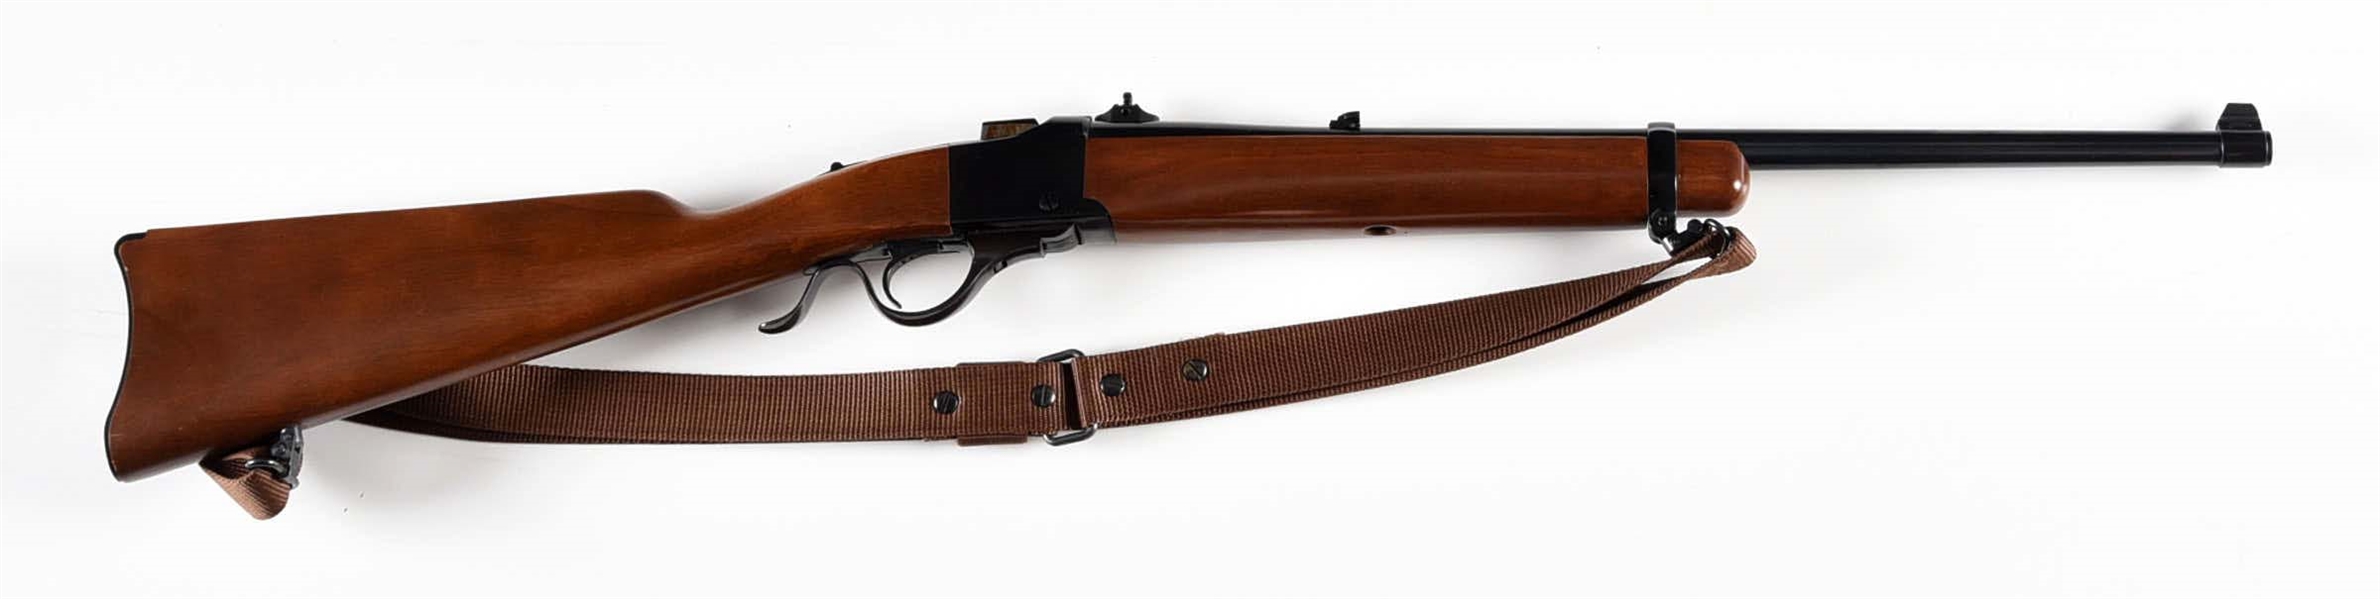 (M) RUGER NO. 3 SINGLE SHOT CARBINE IN .375 WINCHESTER.